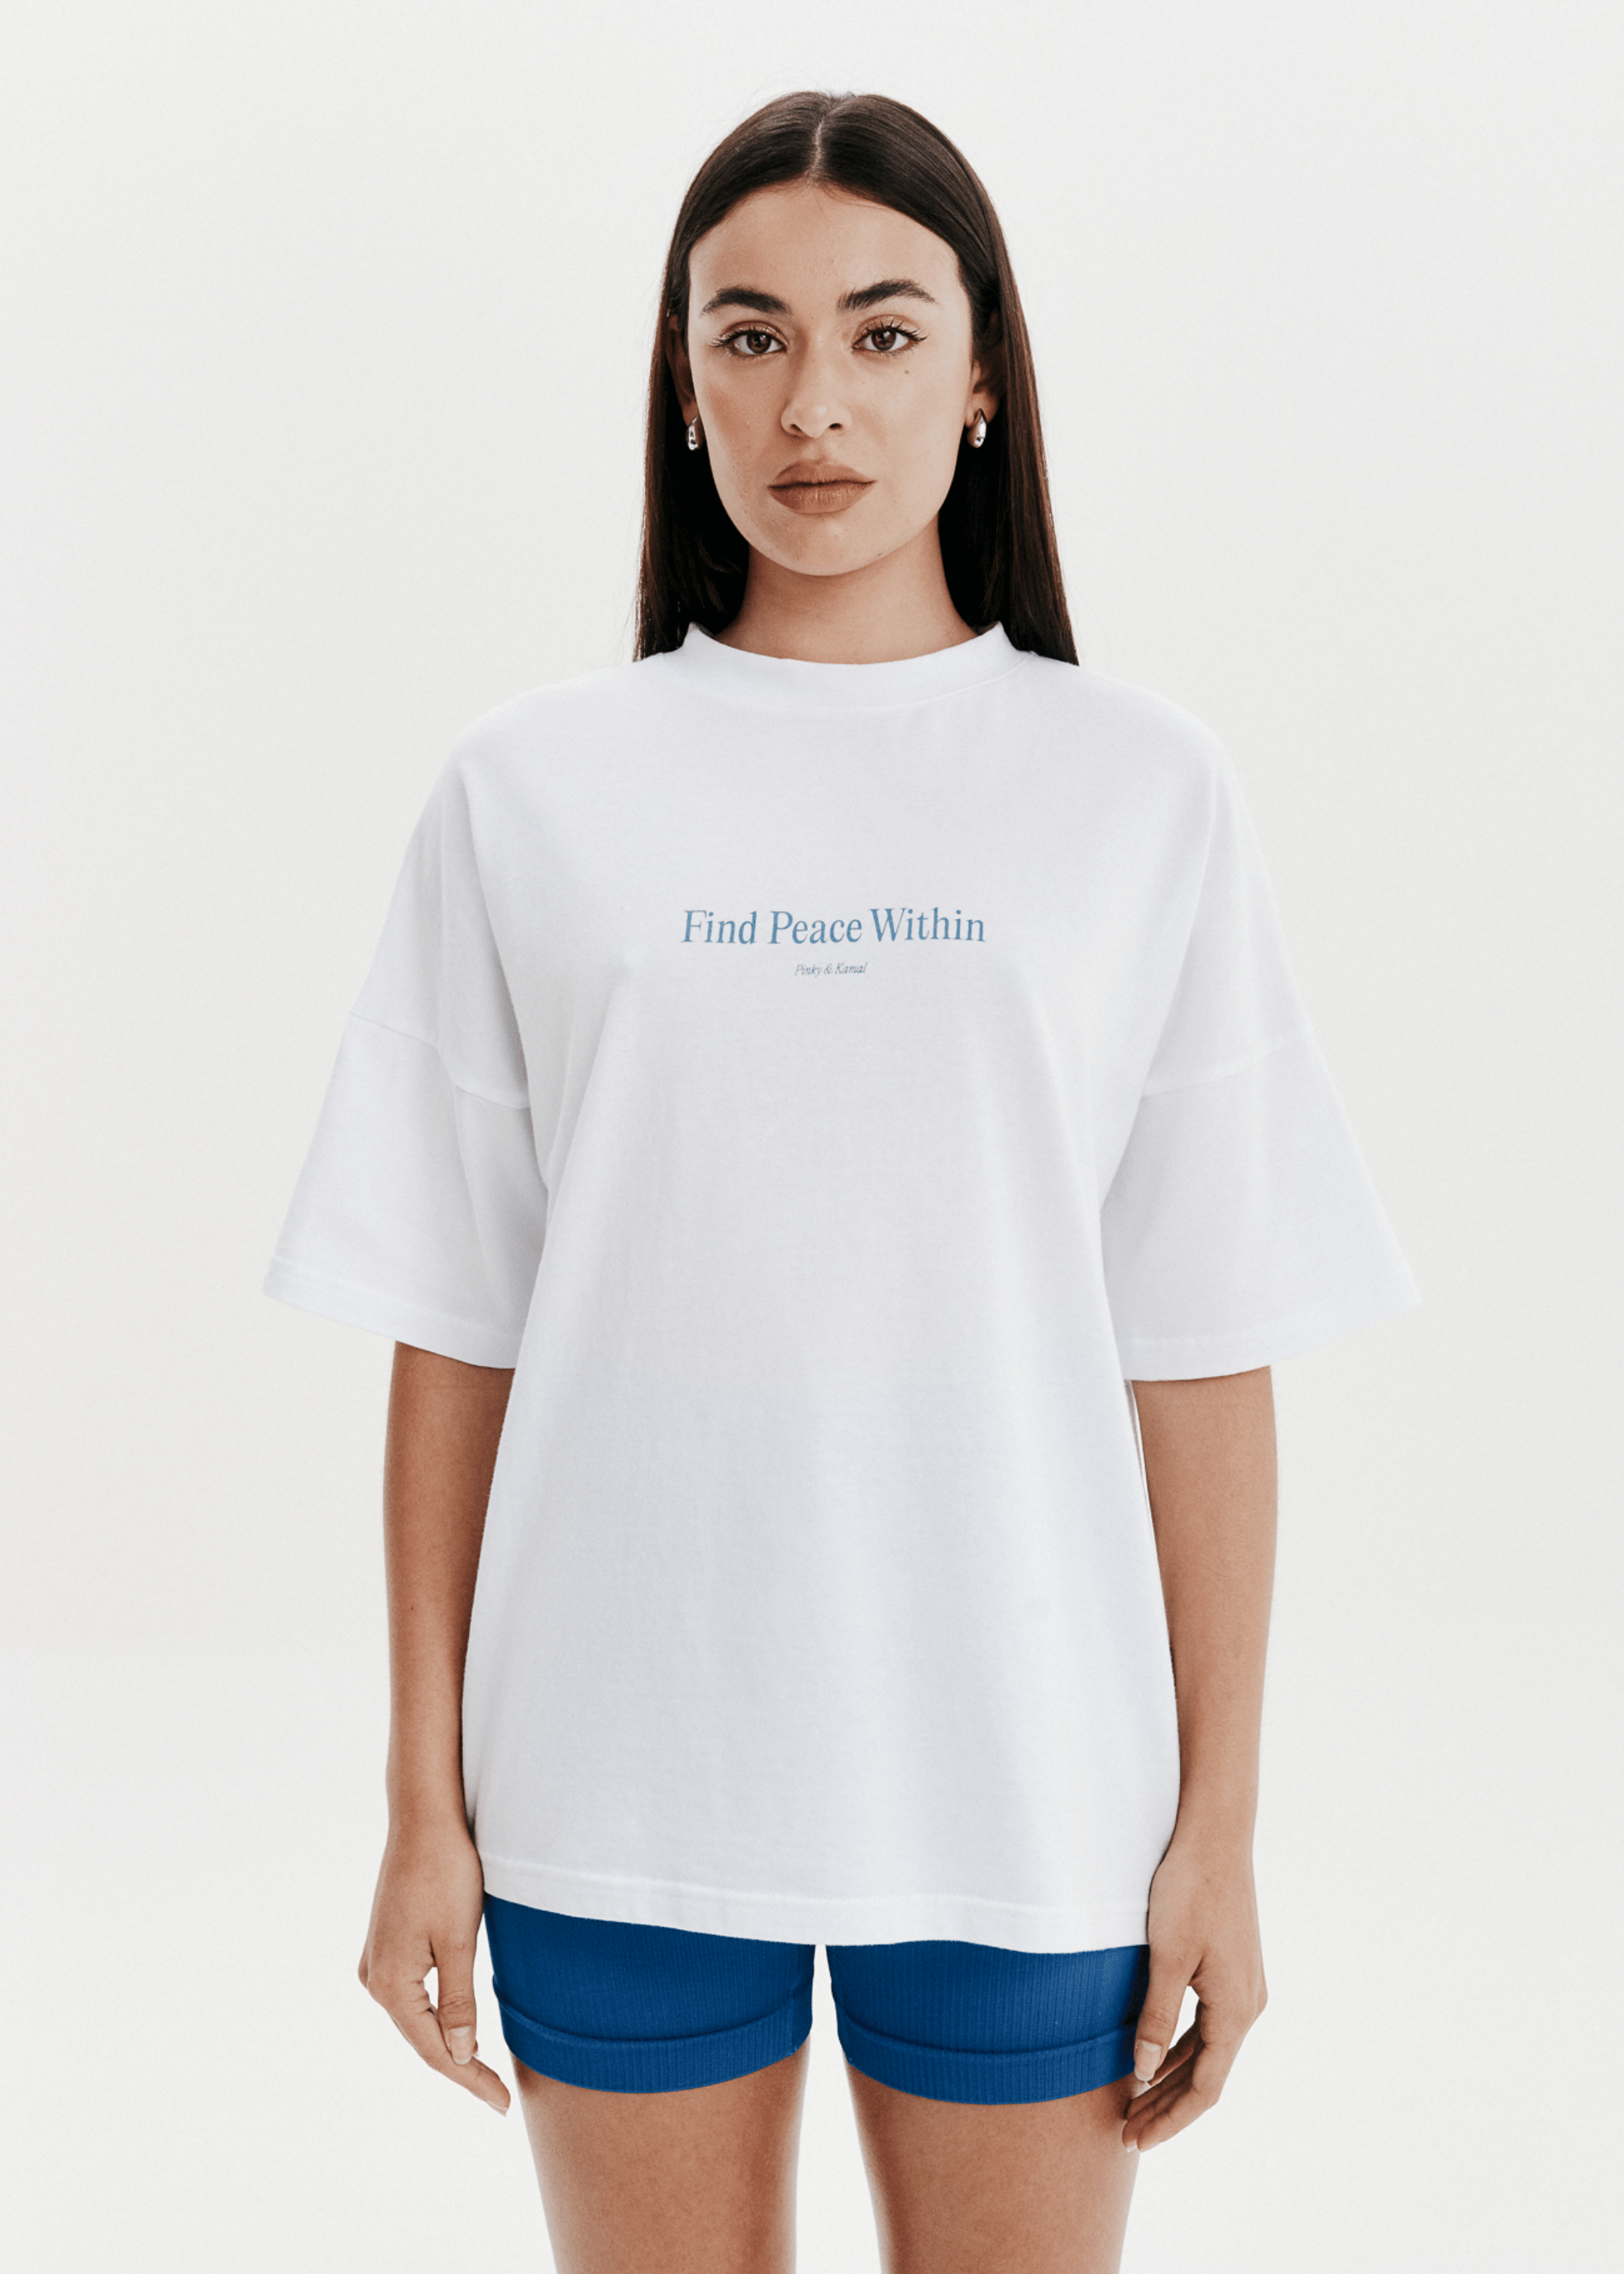 Find Peace Within T-Shirt- White/Blue